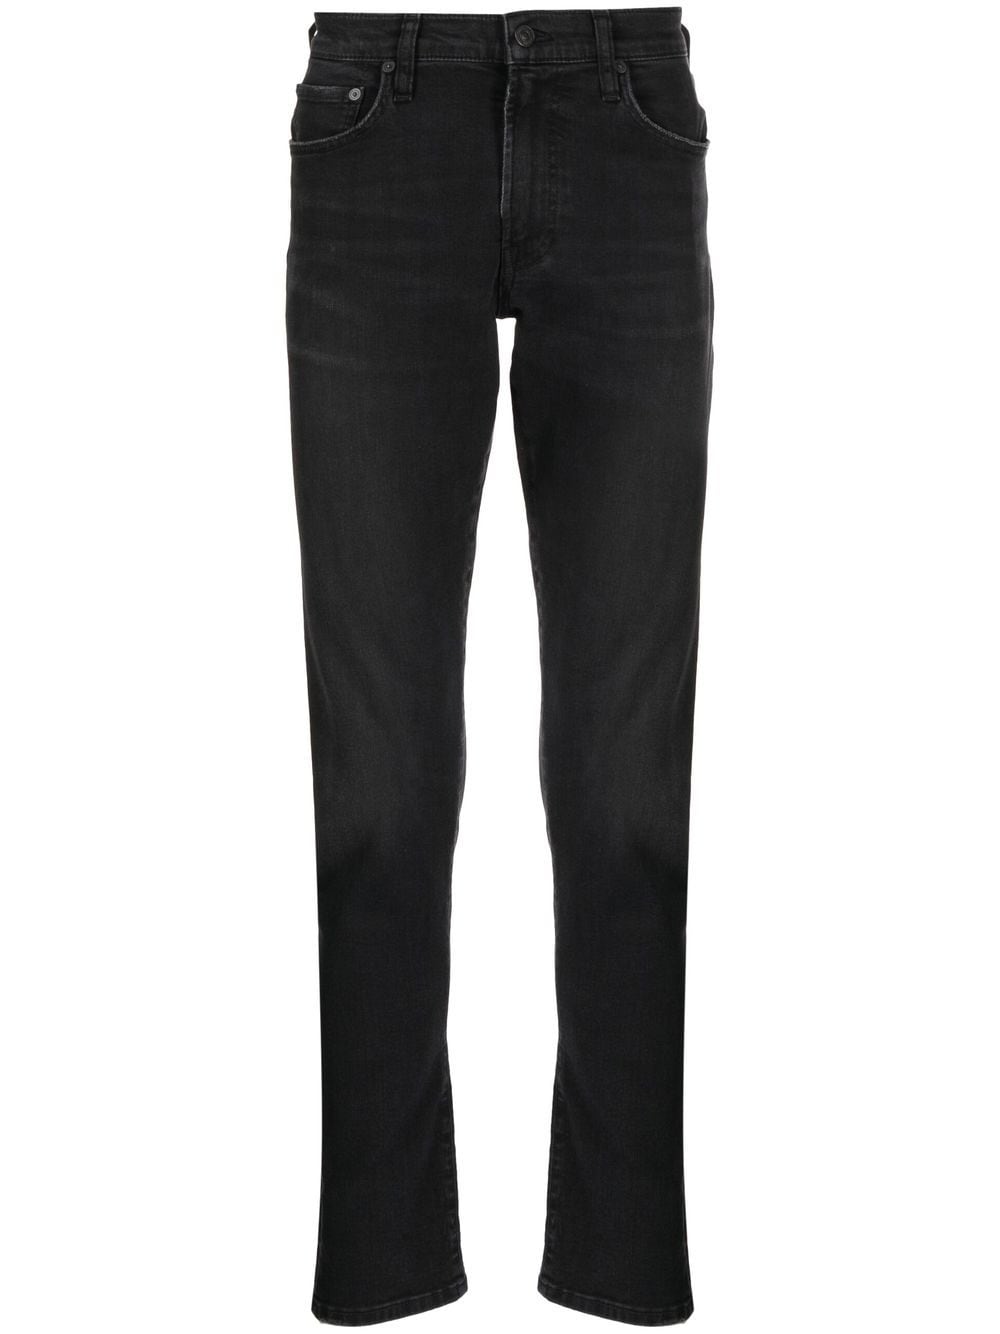 Citizens of Humanity London tapered jeans - Black von Citizens of Humanity